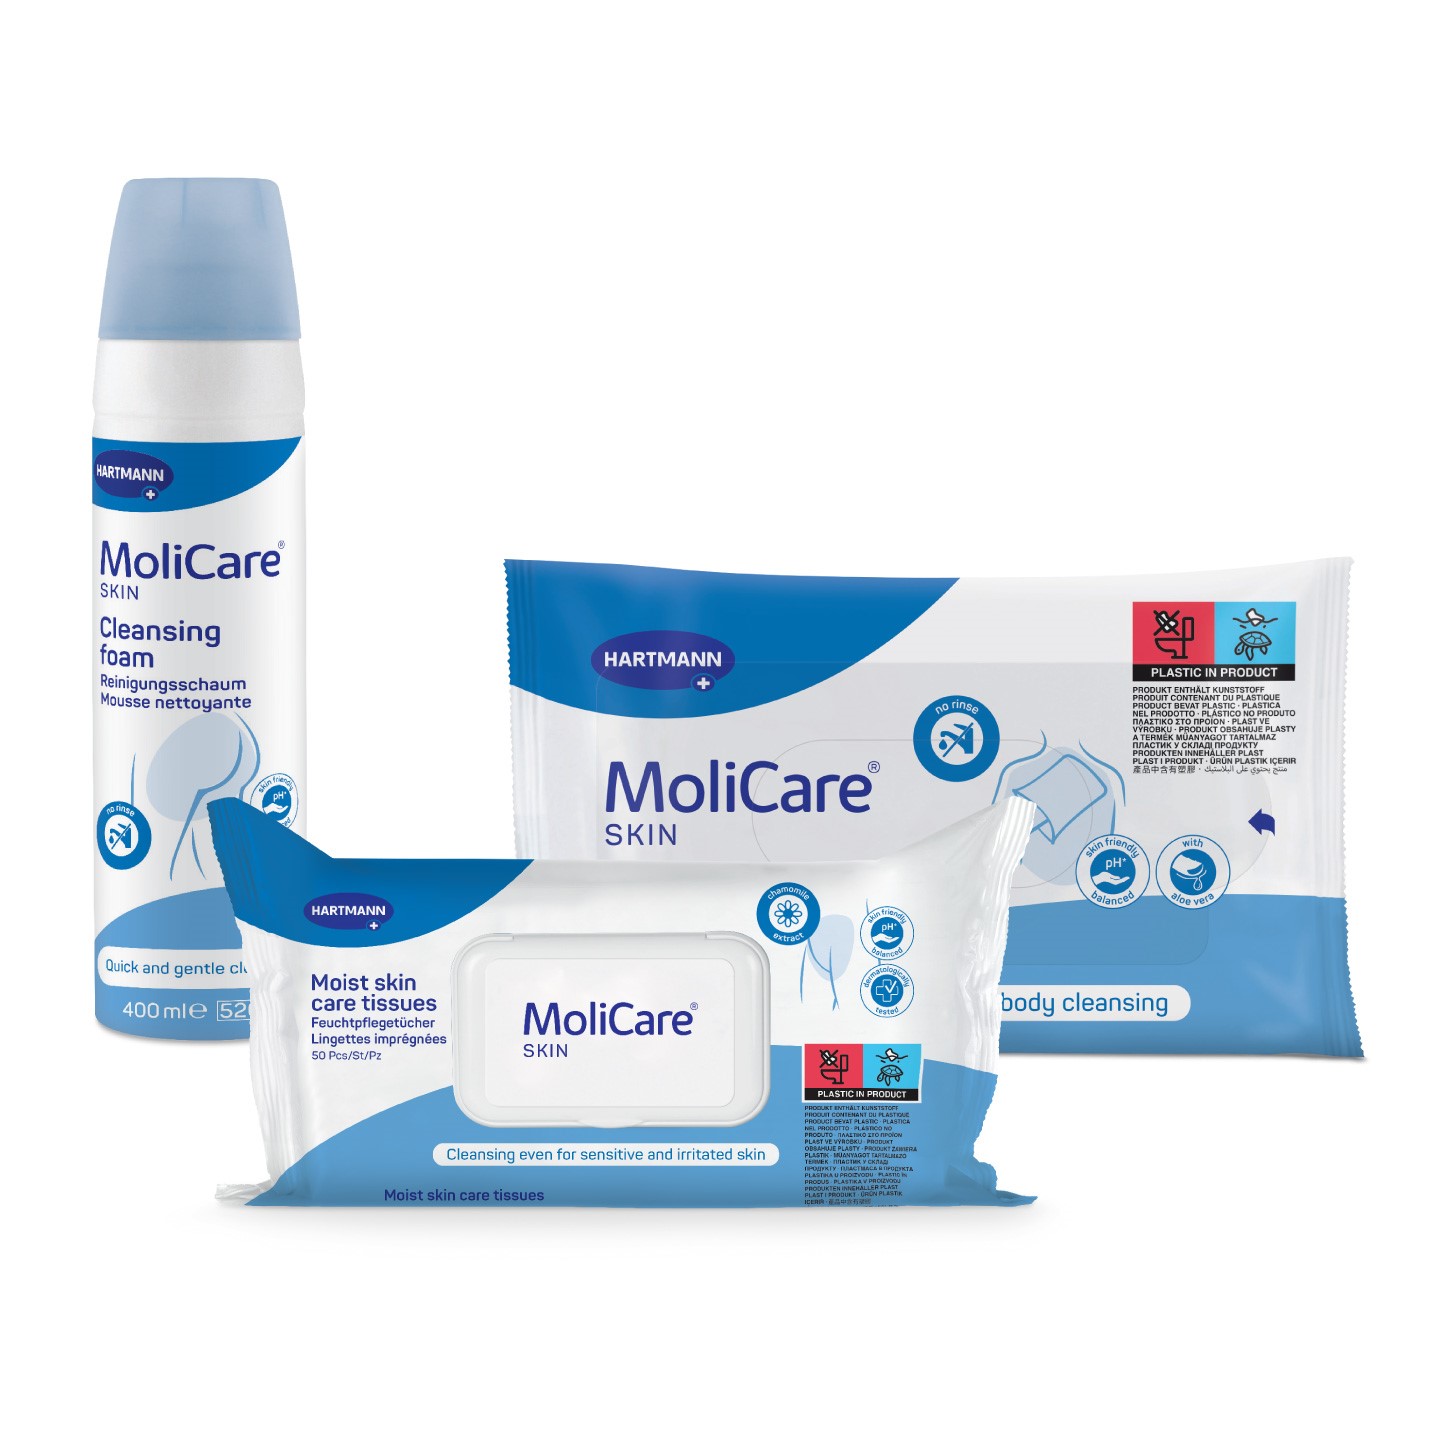 MoliCare Skin Packages